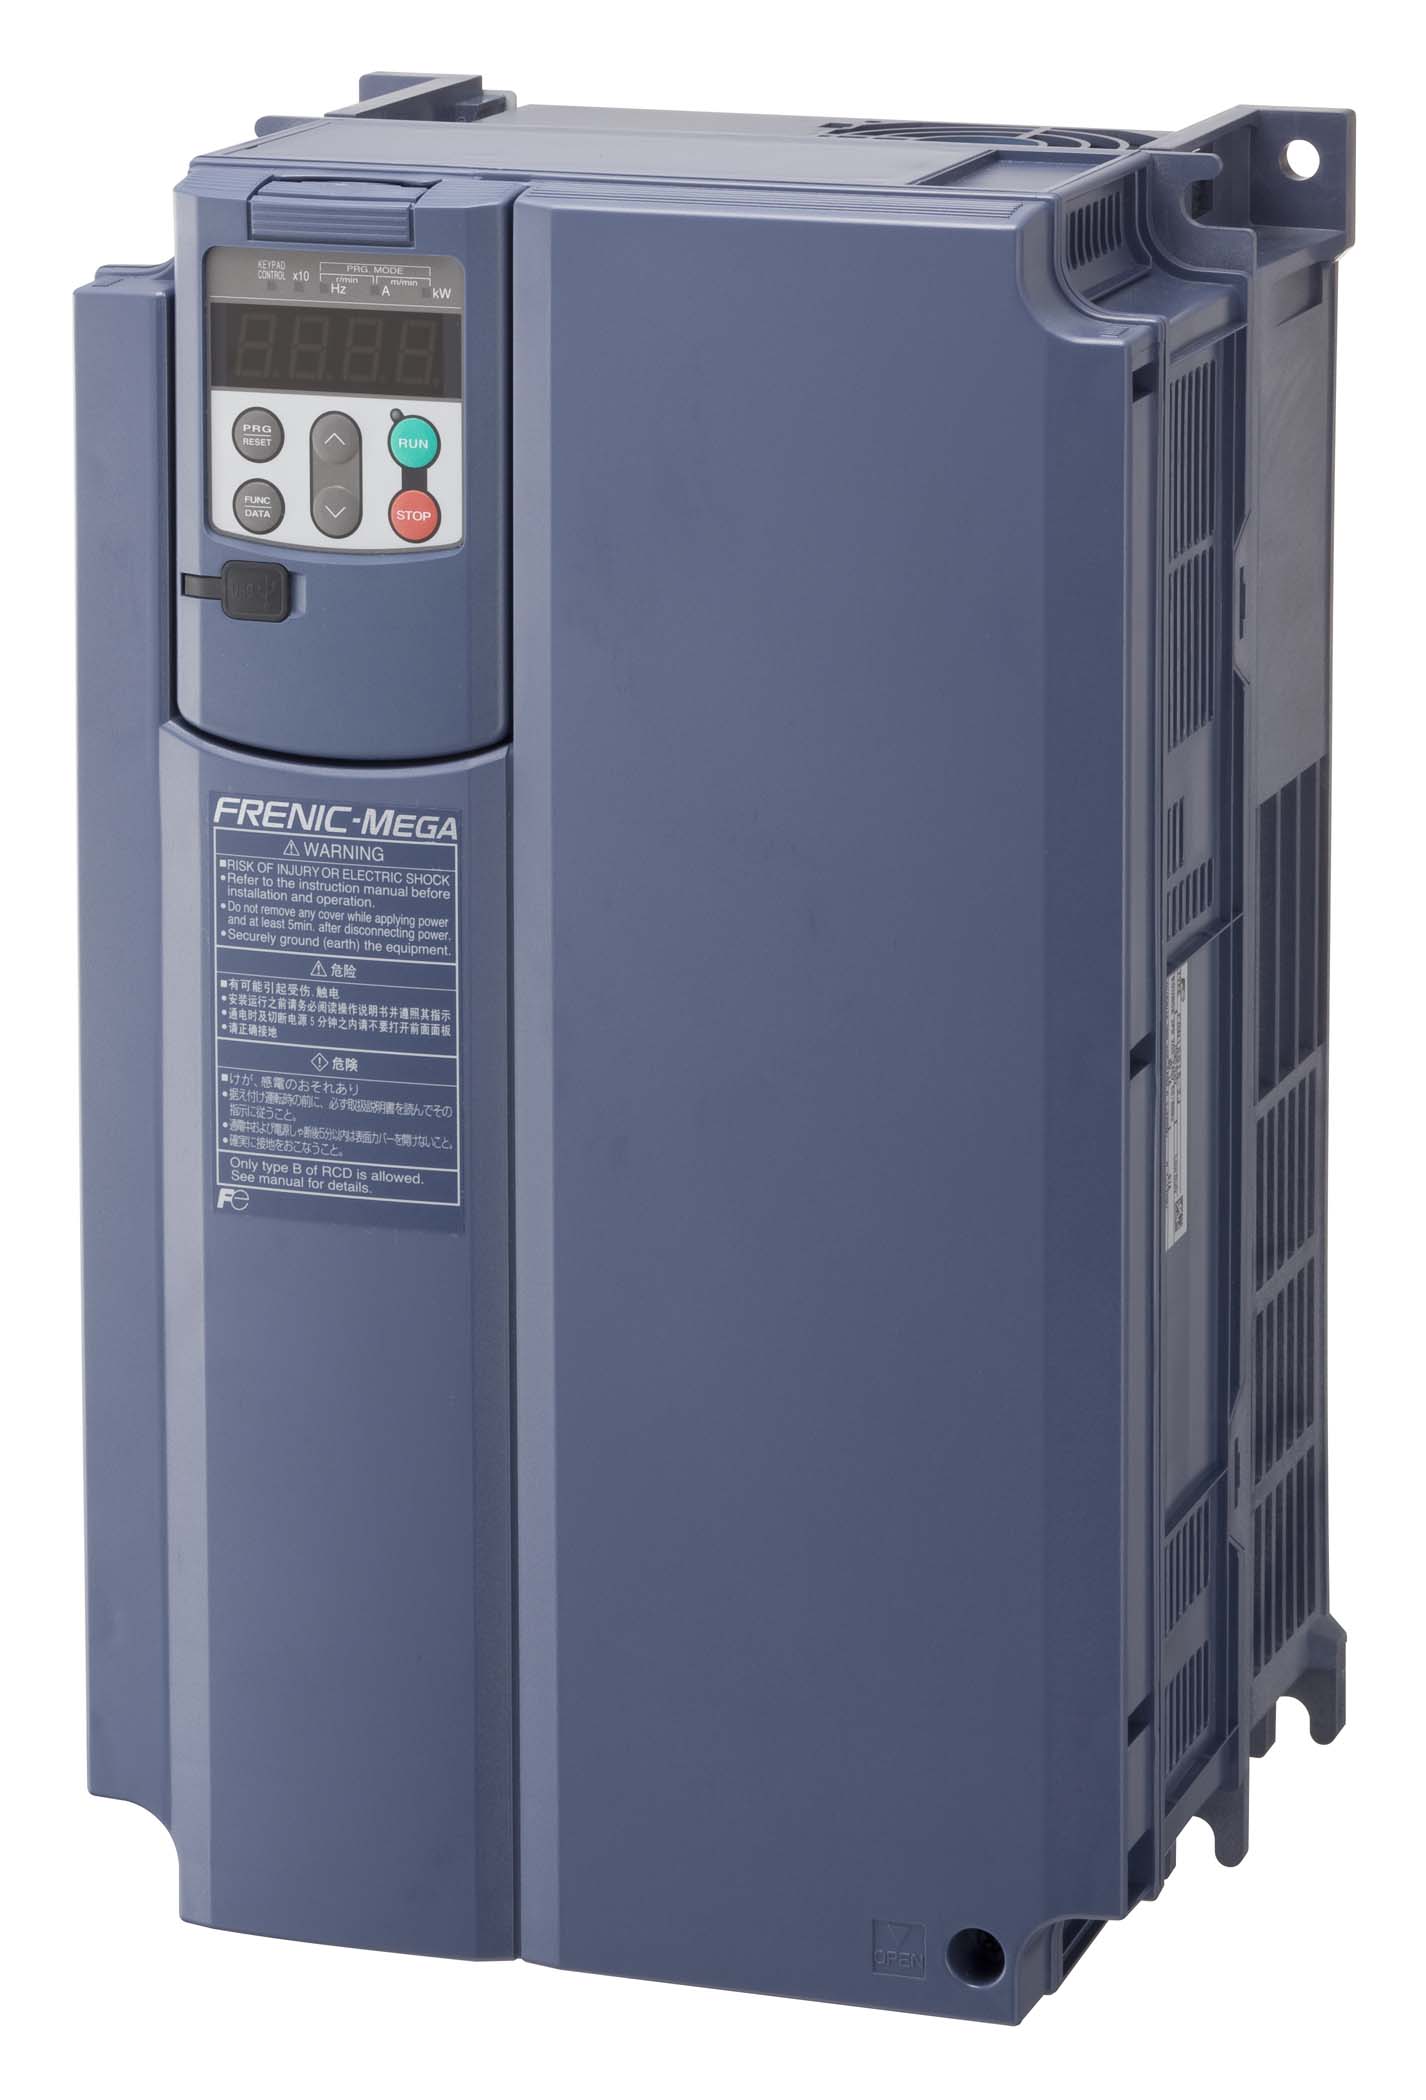 FRENIC-MEGA Series High performance, multifunction Inverter | Fuji Electric Co., Ltd | Search by Company | Products CC-Link Partner